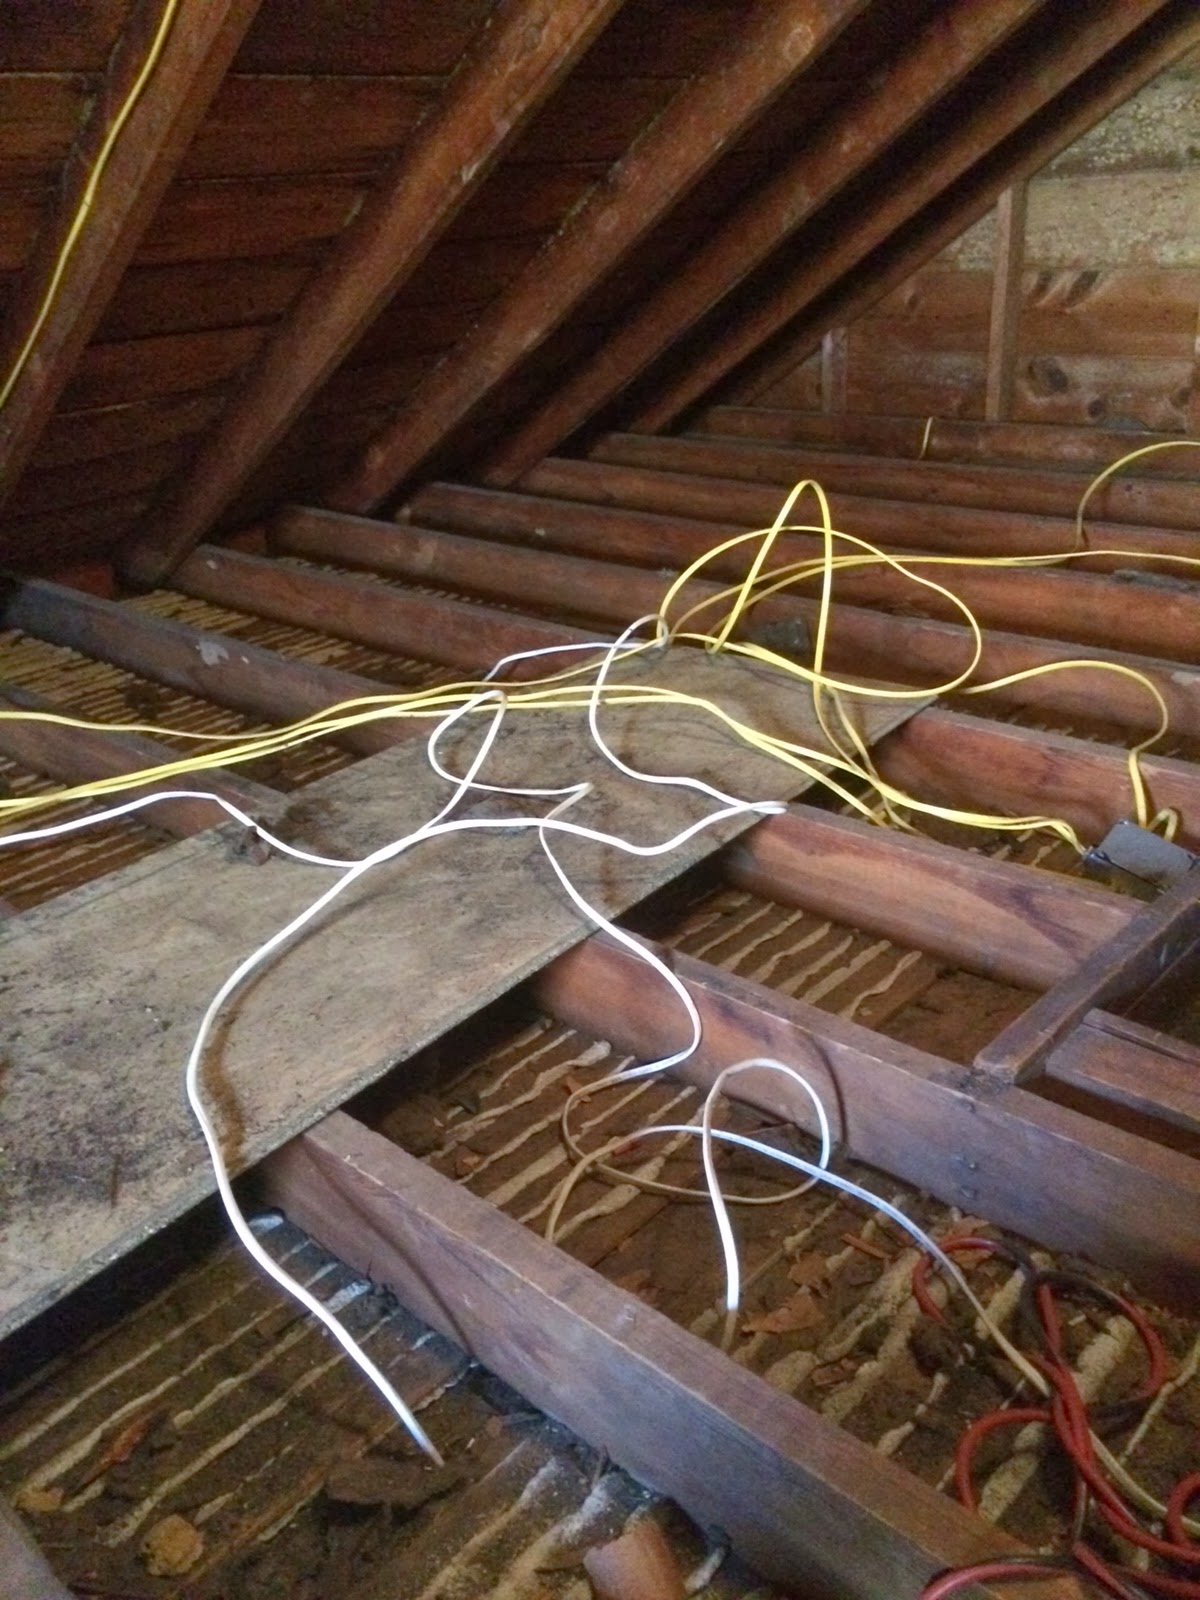 In The Little Yellow House  Attic Prep Work  Wires